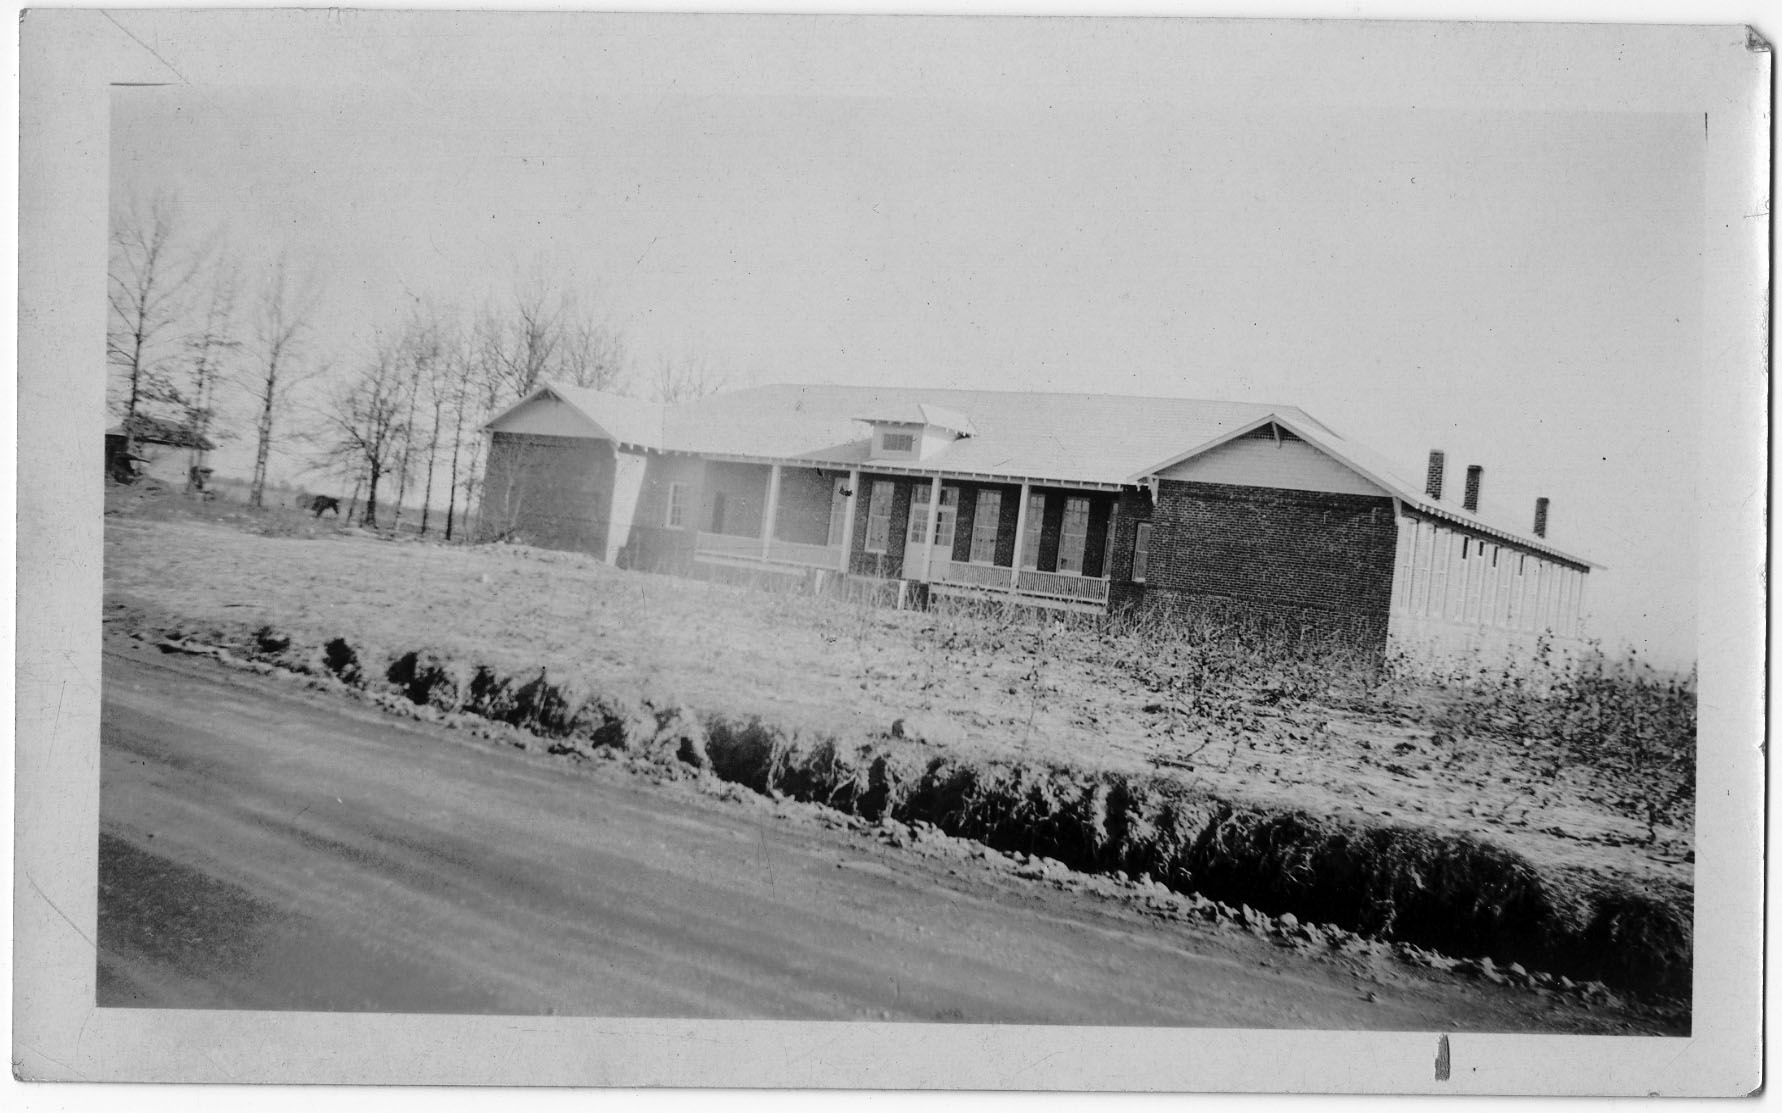 New Johnstone School - Courtesy of the Fitzgerald Collection, WU Pettus Archives